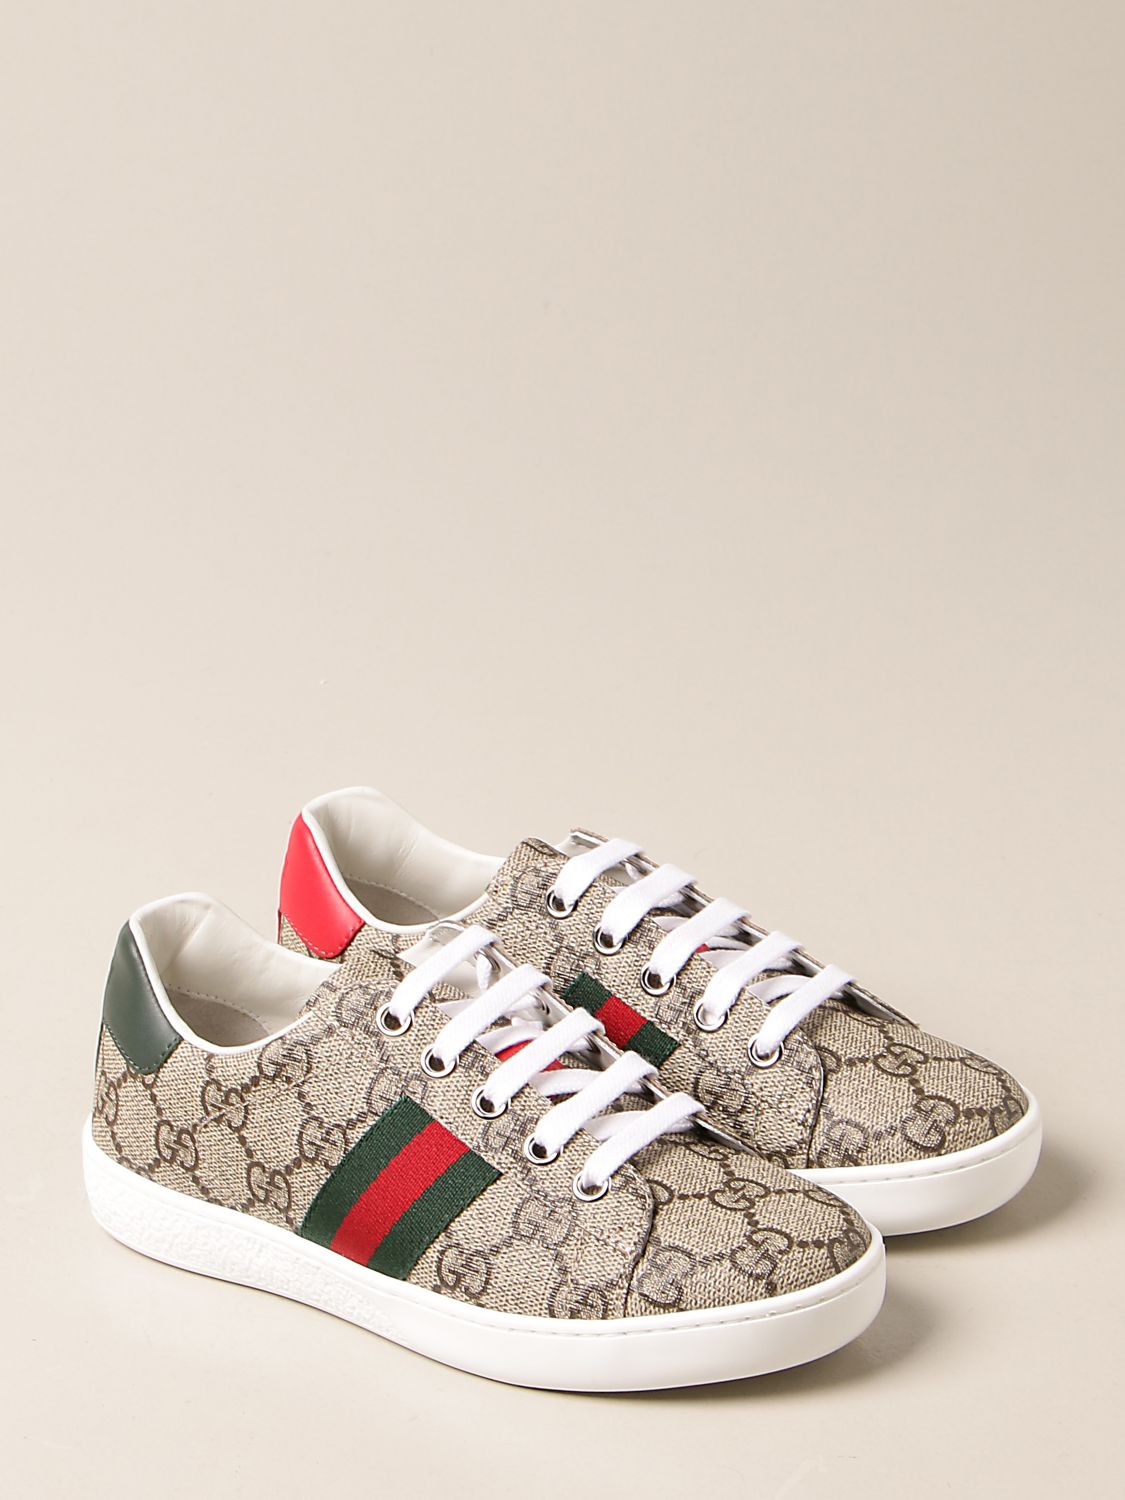 GUCCI: Ace sneakers in GG Supreme fabric with Web bands - Green | Gucci ...